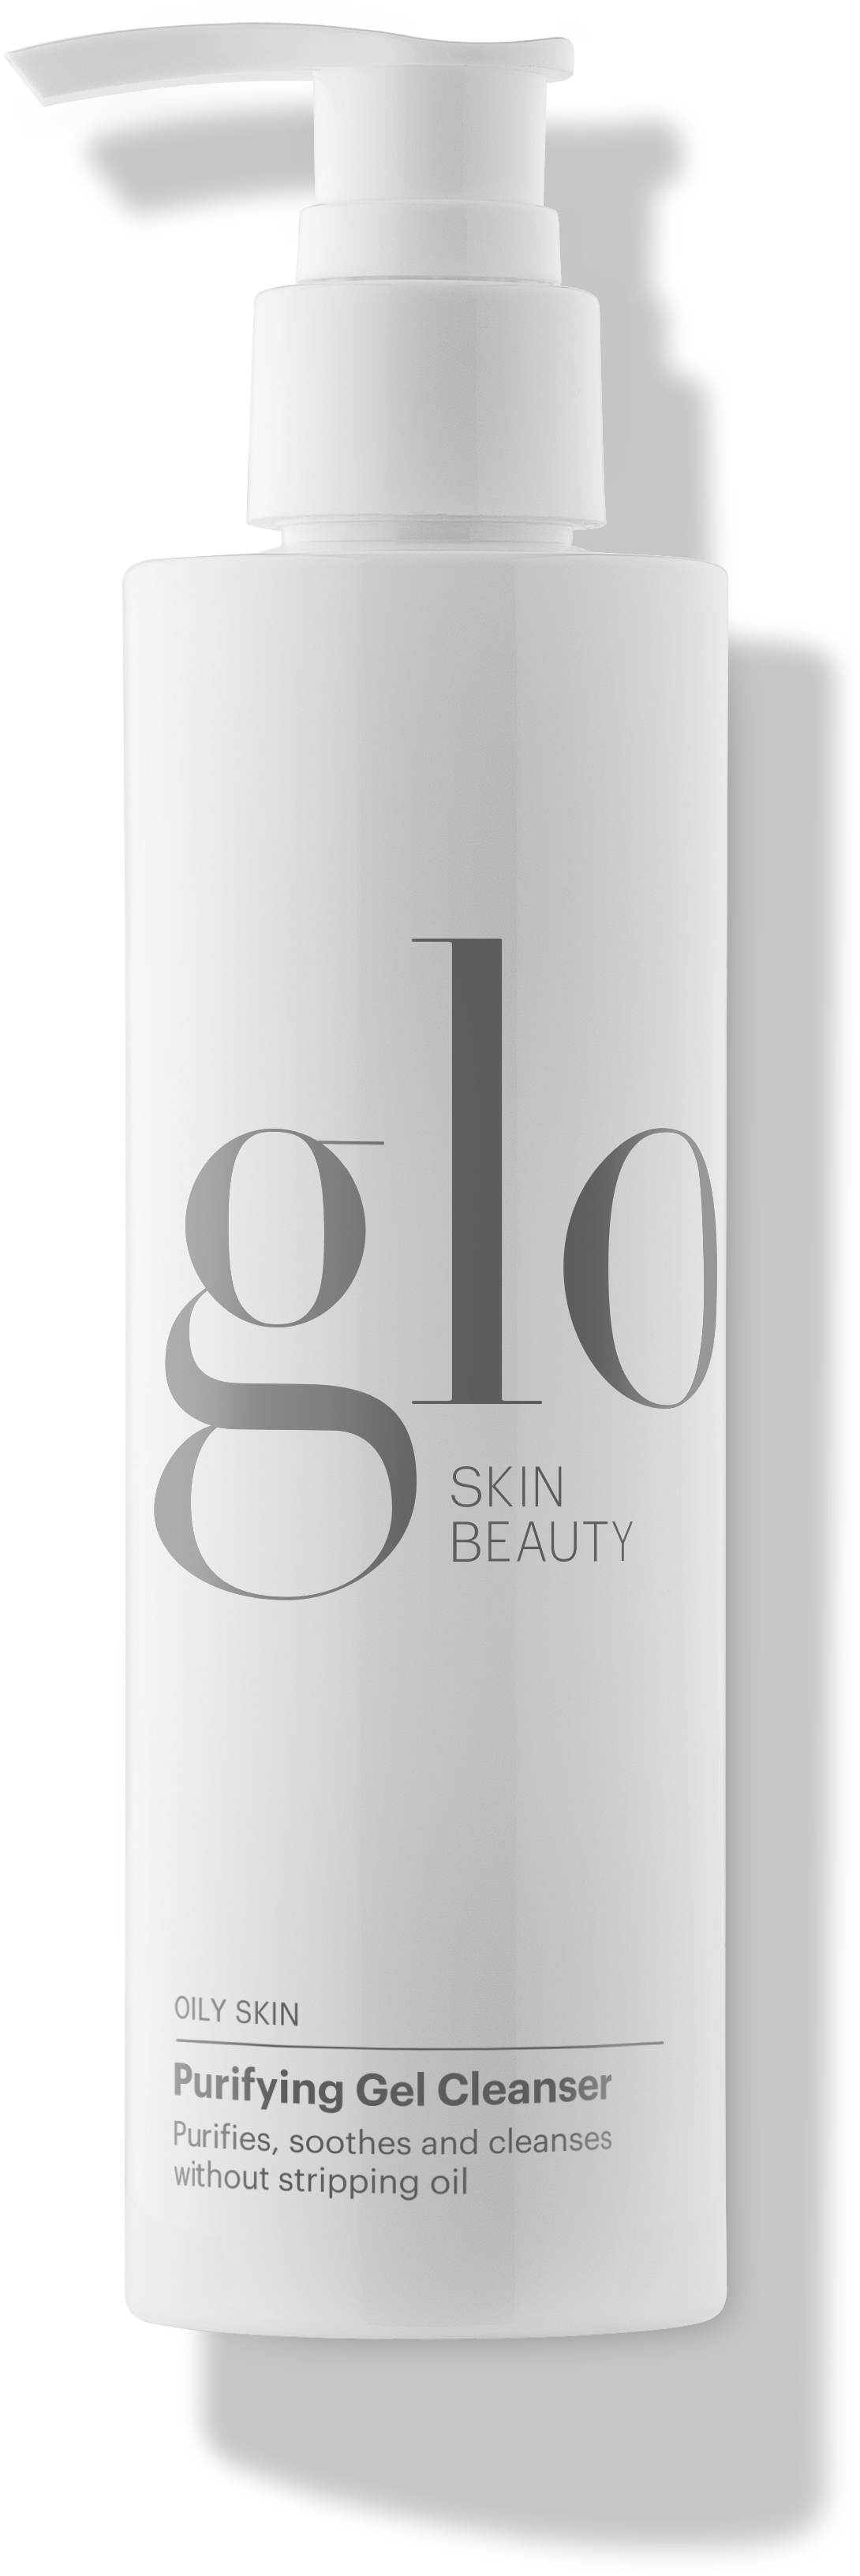 gloTherapeutics Purifying Gel Cleanser